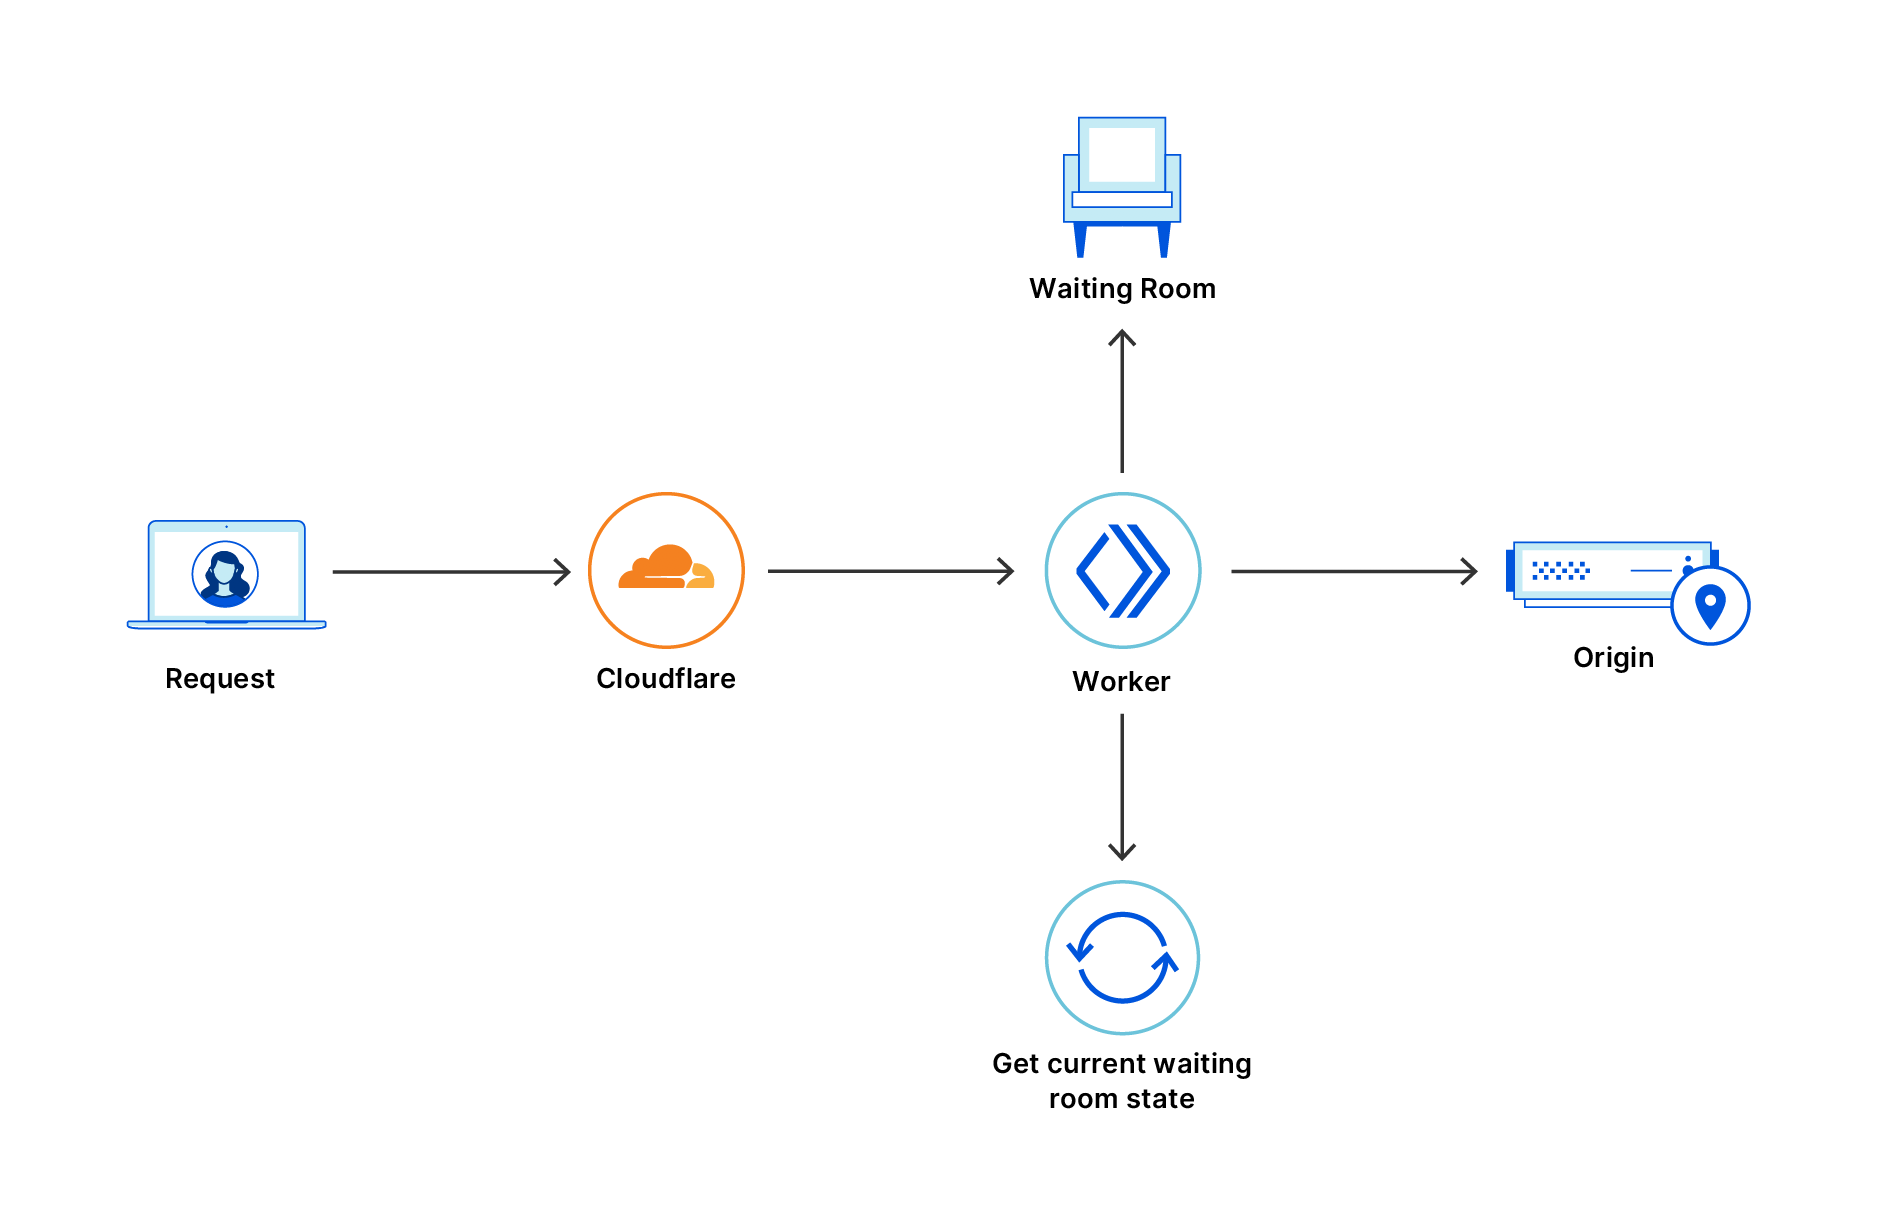 Waiting Room process flow showing how a request is managed by Cloudflare and placed in a waiting room before reaching the origin website